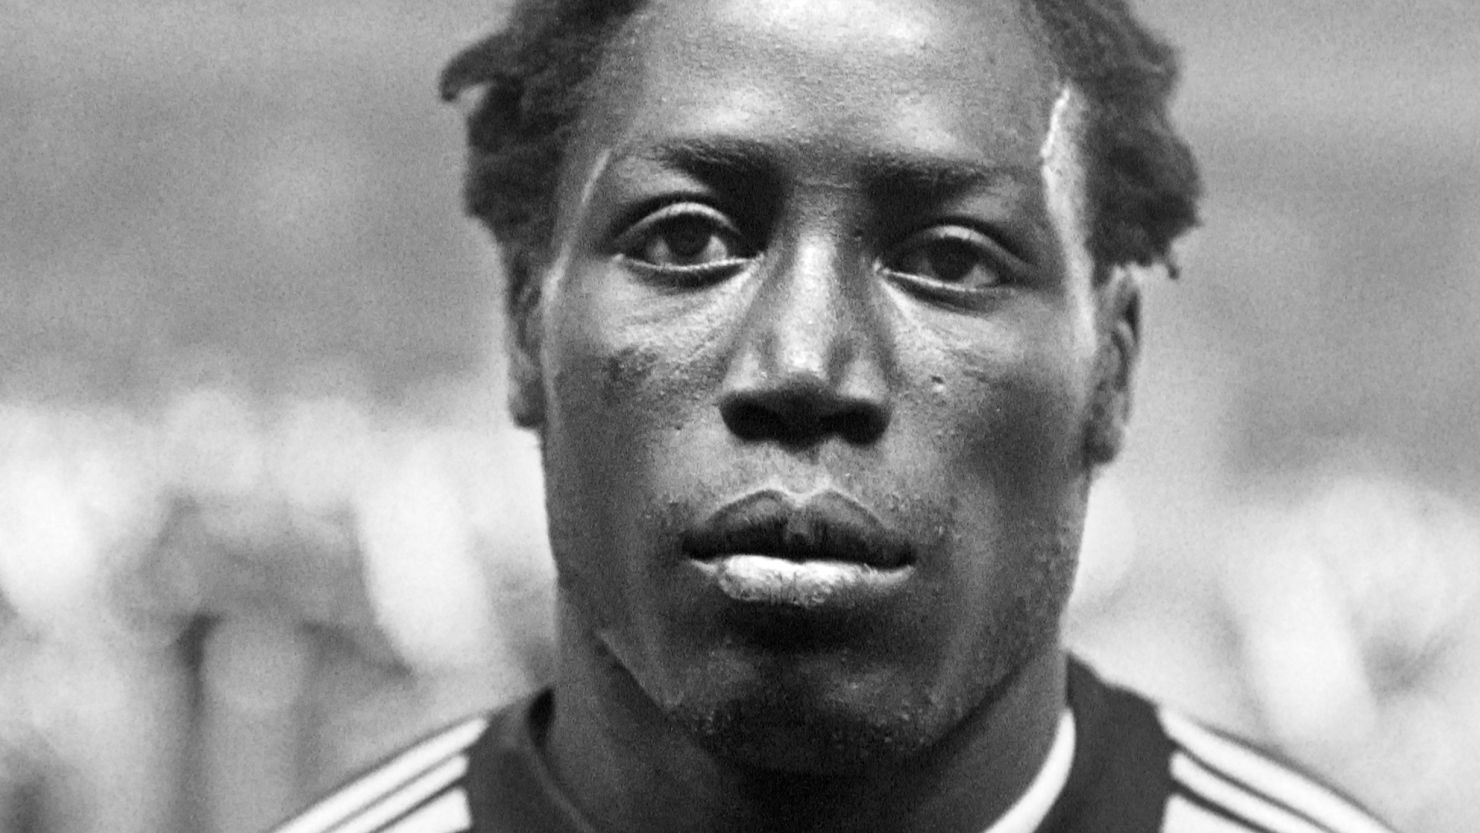 Jean-Pierre Adams won 22 caps for France between 1972 and 1976.